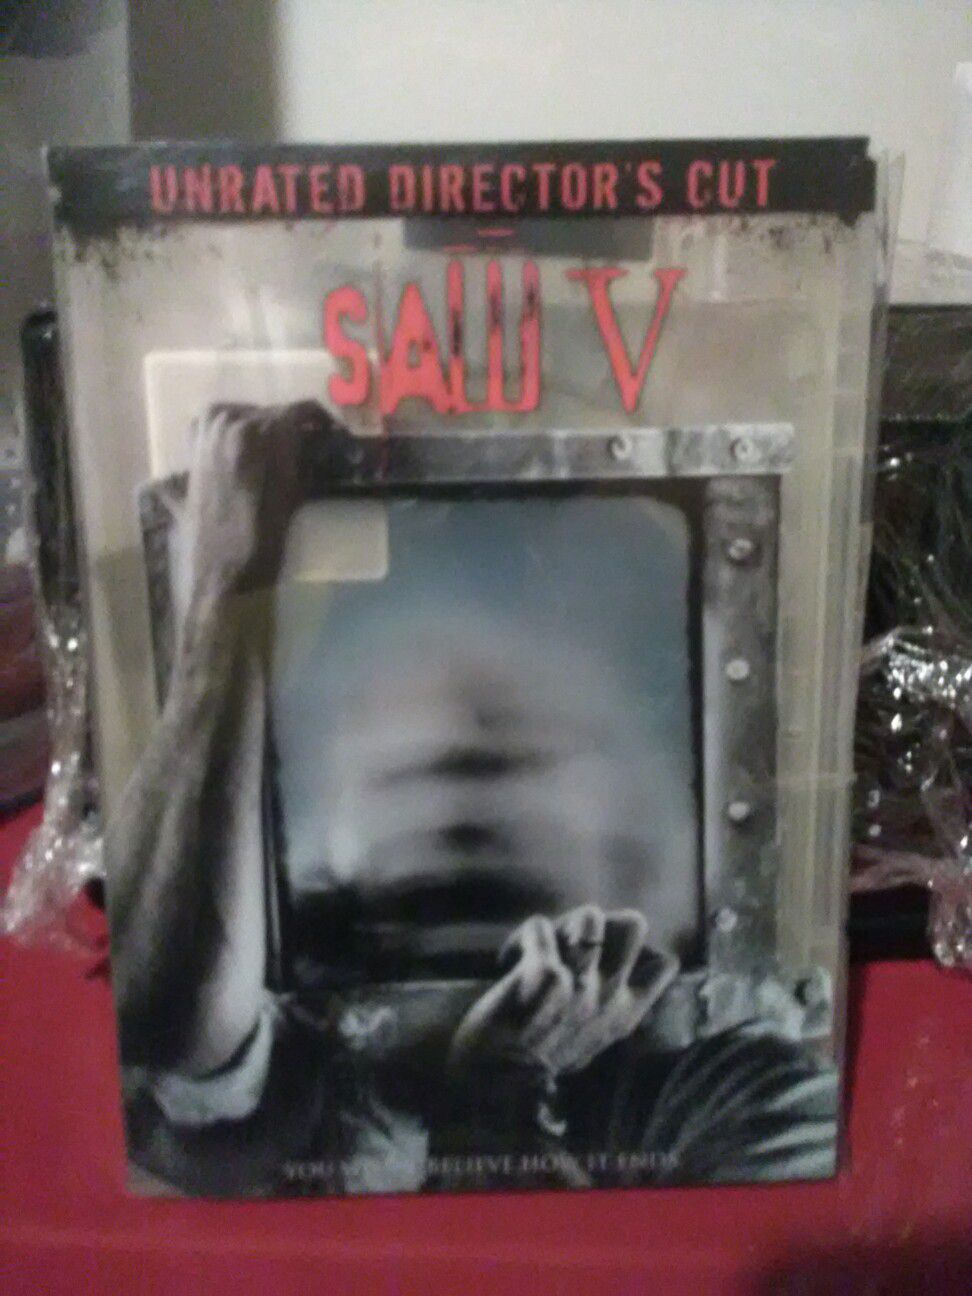 Saw V Unrated Director's Cut DVD